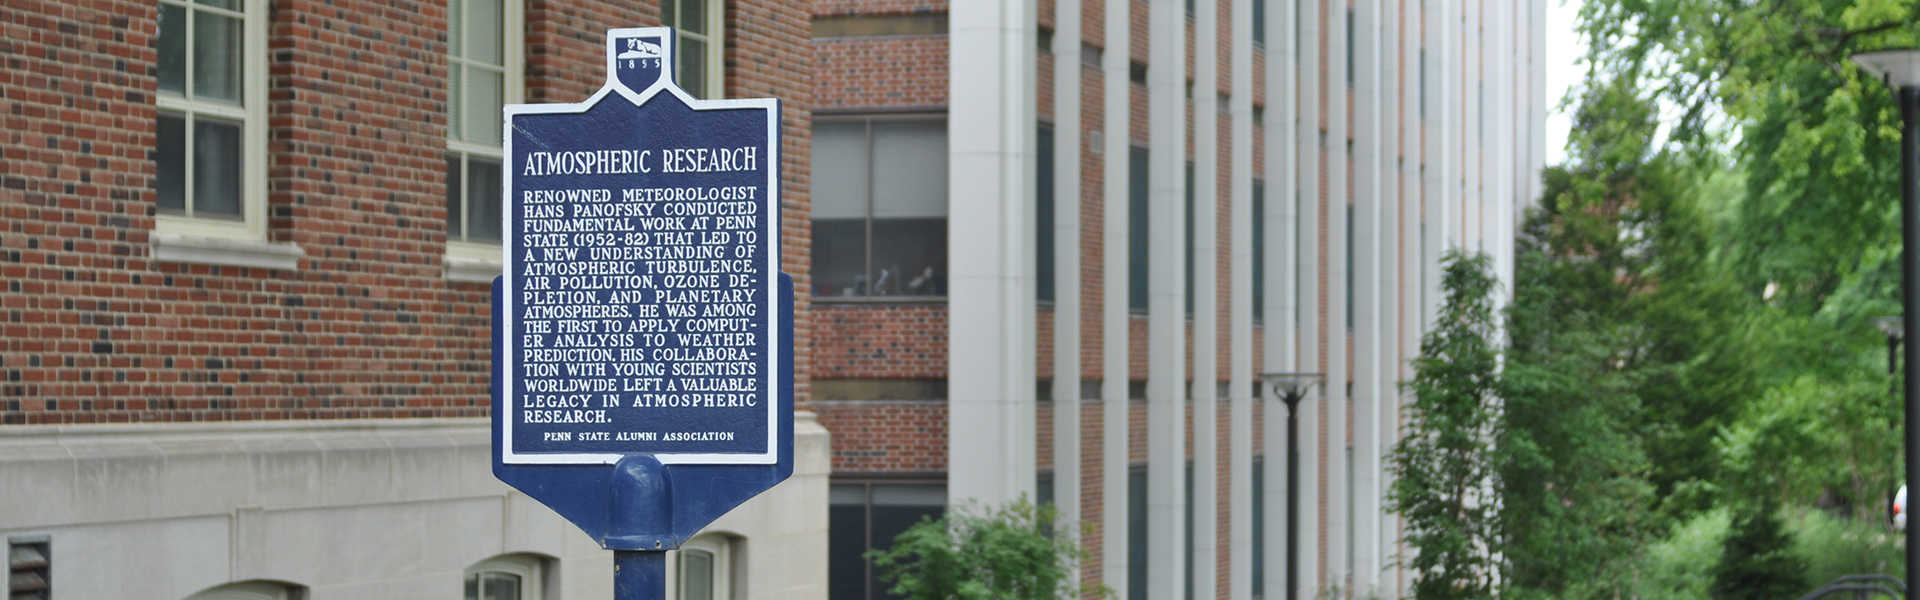 Penn State sign about atmospheric research